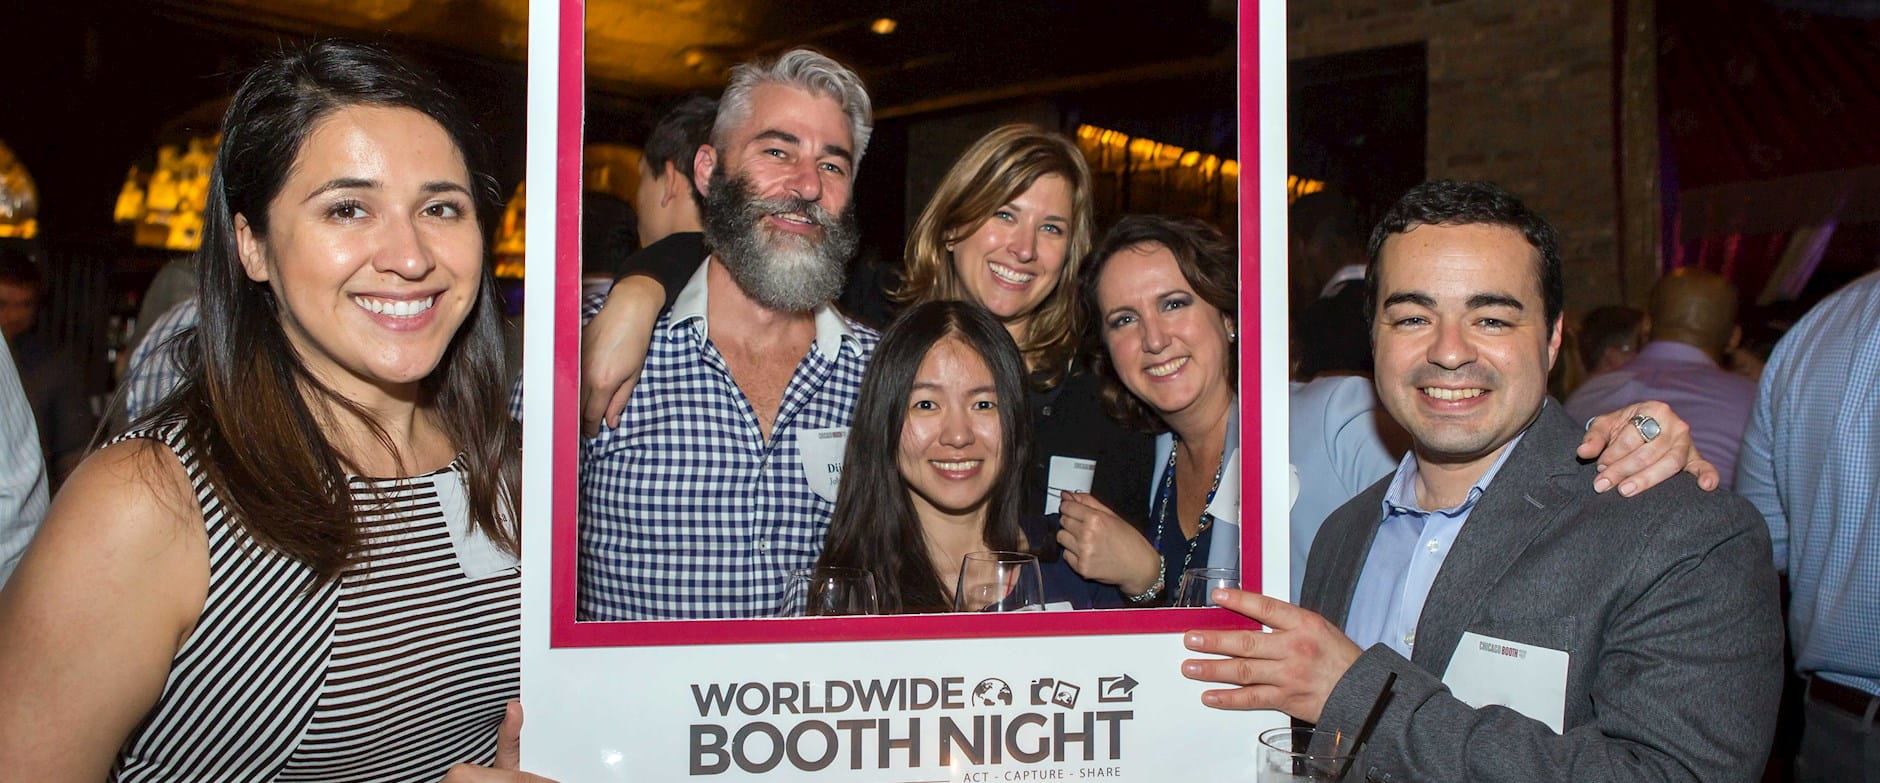 People posing with a social media frame at a Worldwide Booth Night event